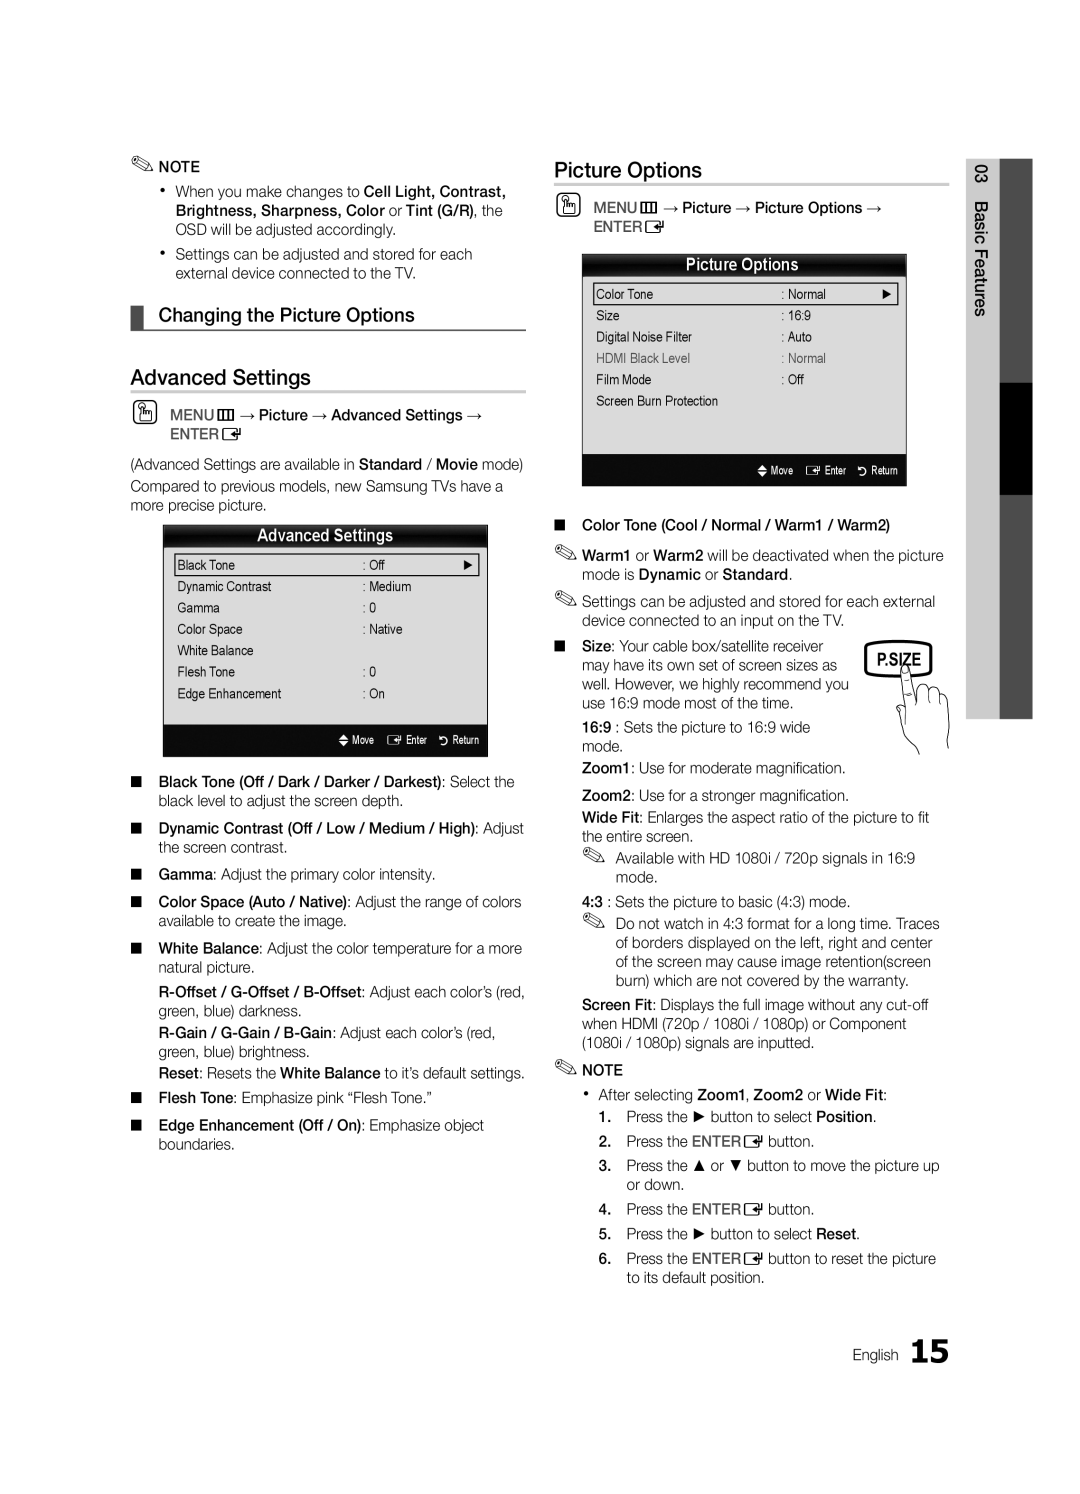 Samsung PC430-ZC, BN68-02576B-06 user manual Advanced Settings, Changing the Picture Options, Entere 